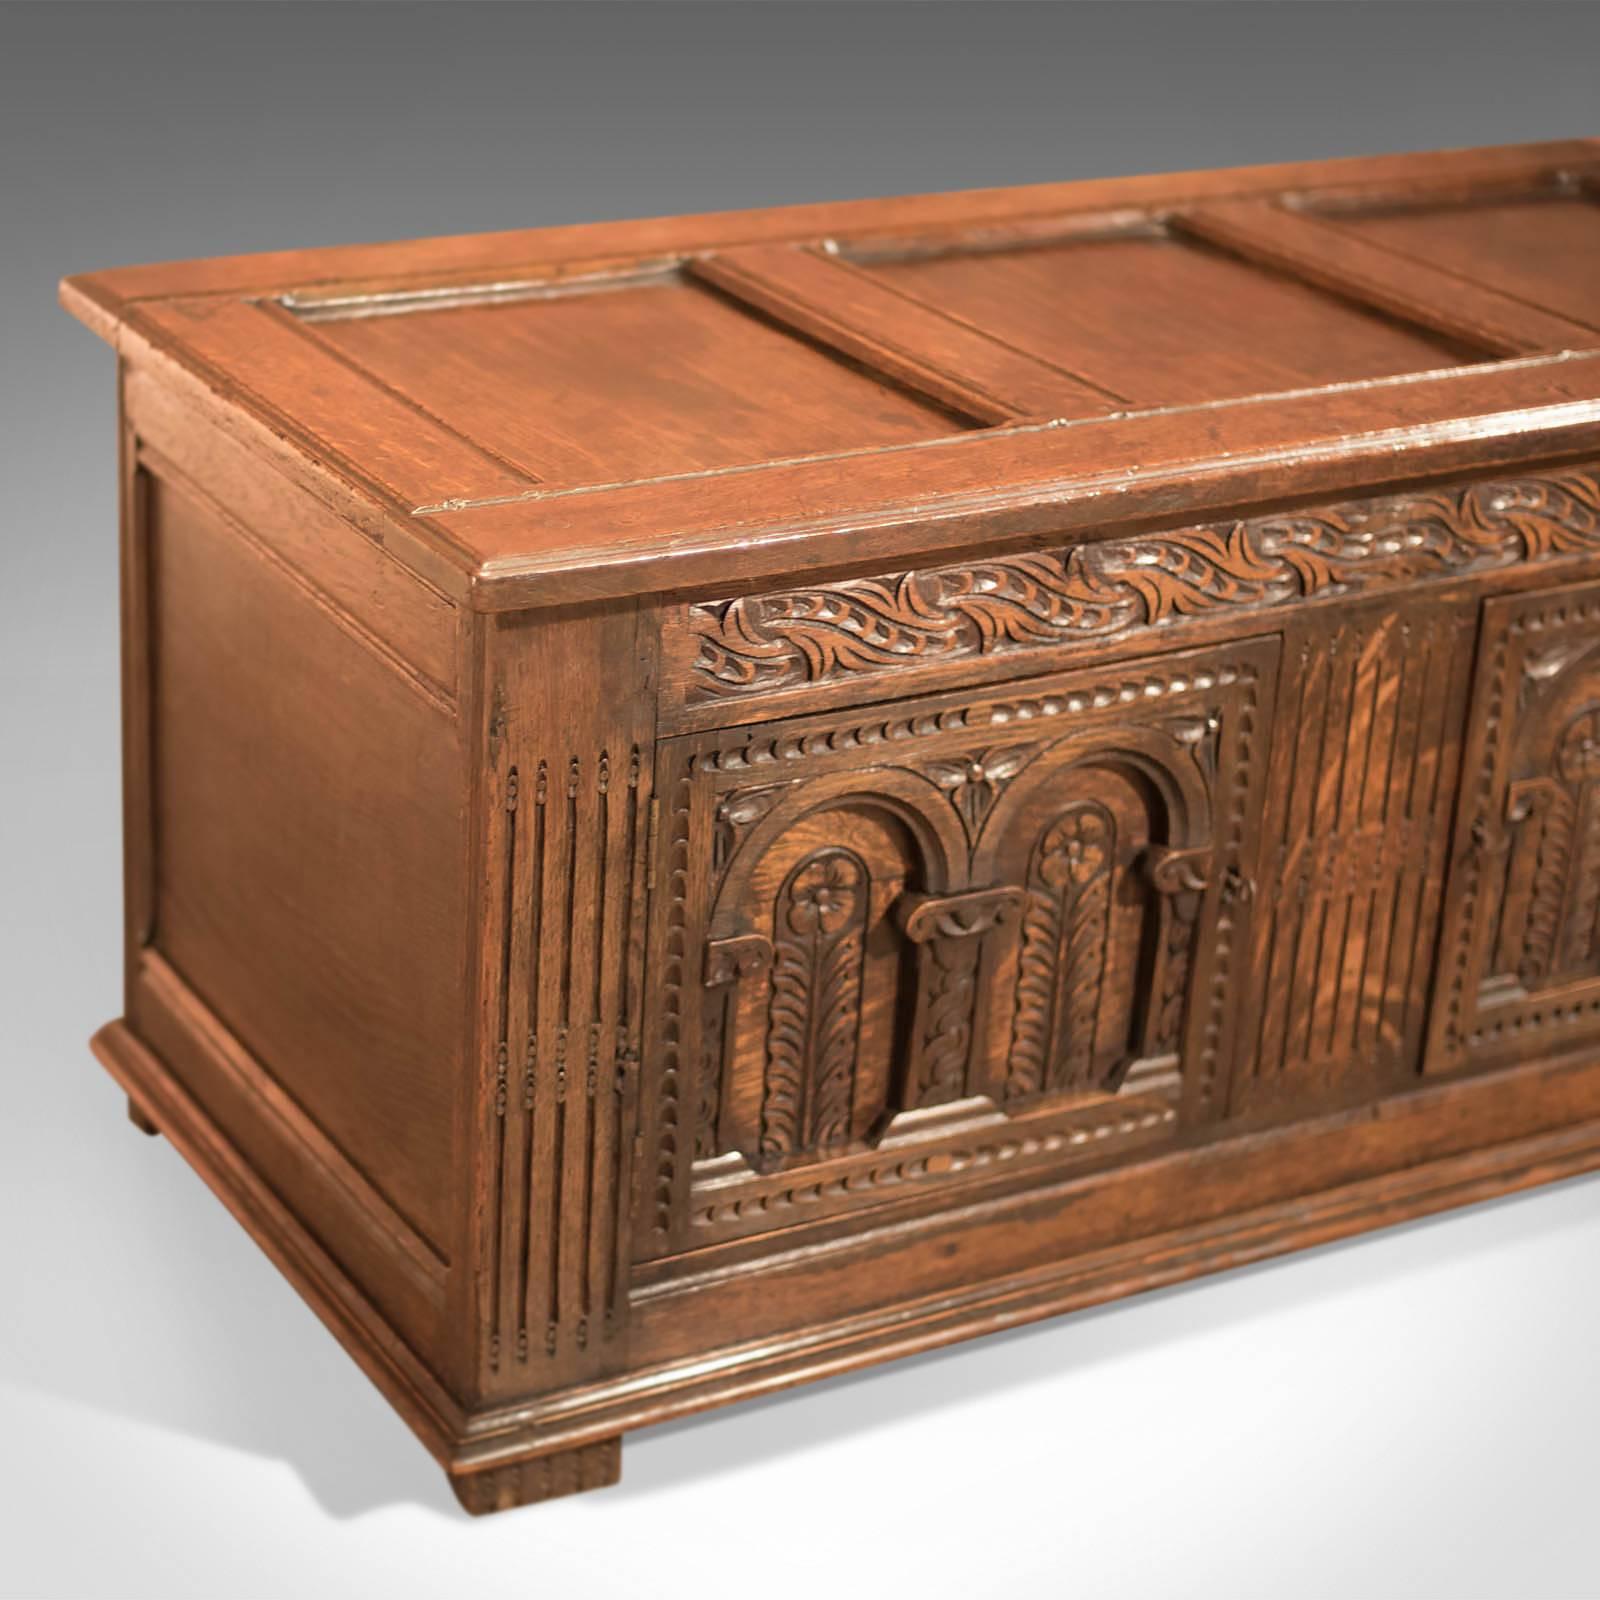 18th Century and Earlier 18th Century Antique Coffer, English Oak Furniture